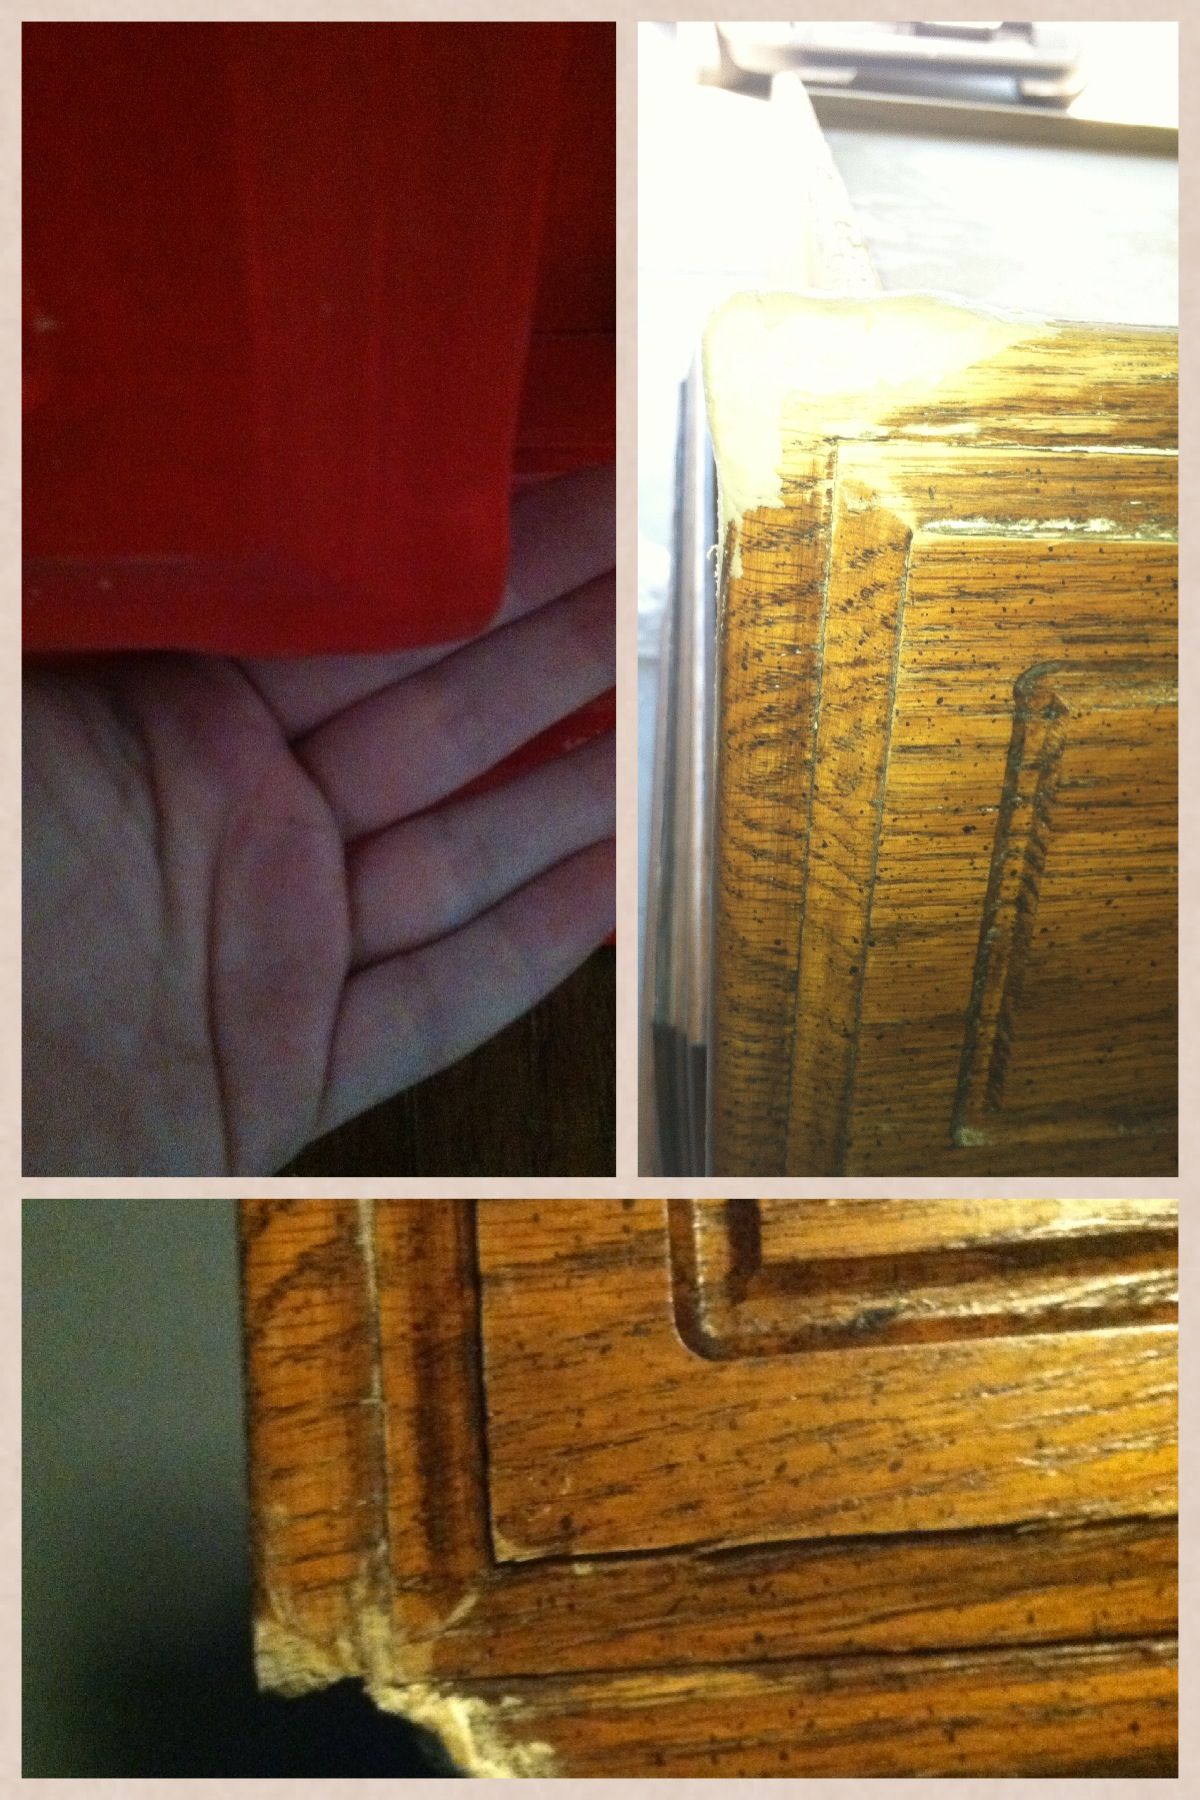 How to fix a broken wood corner. Wood epoxy can be used to repair ...